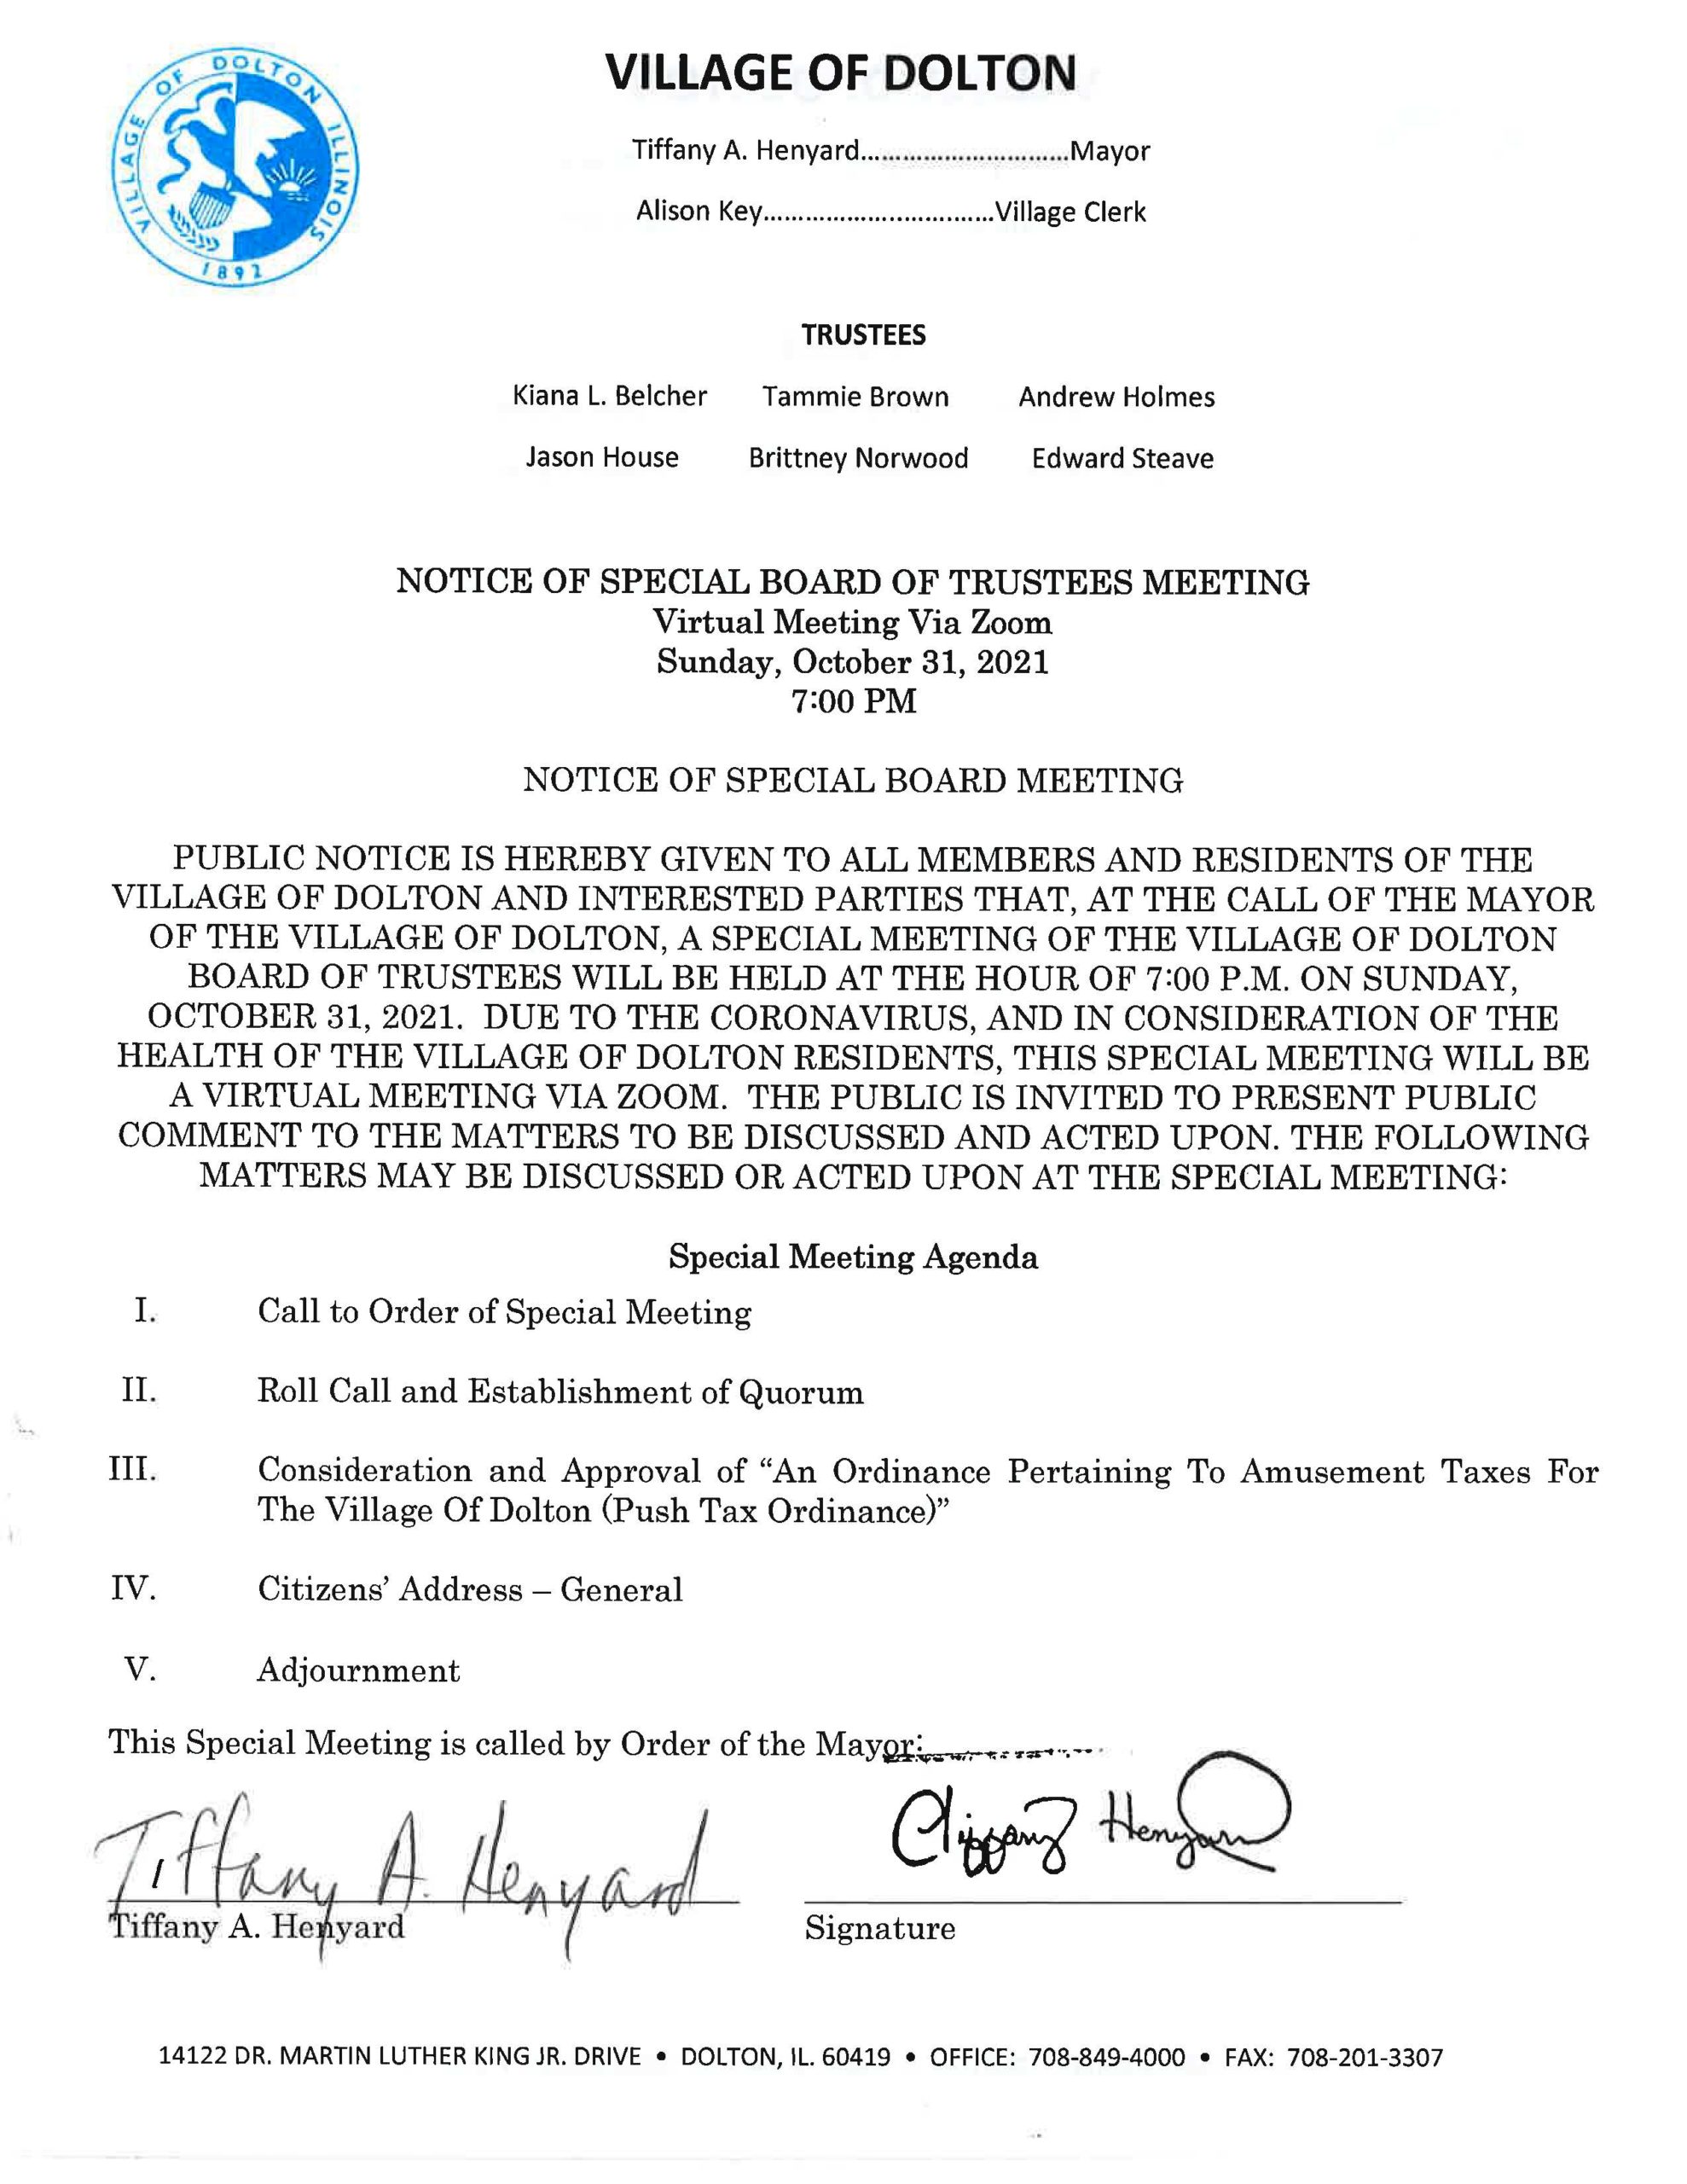 You are currently viewing Agenda Only for Special Board Meeting Sun, Oct. 31, 2021